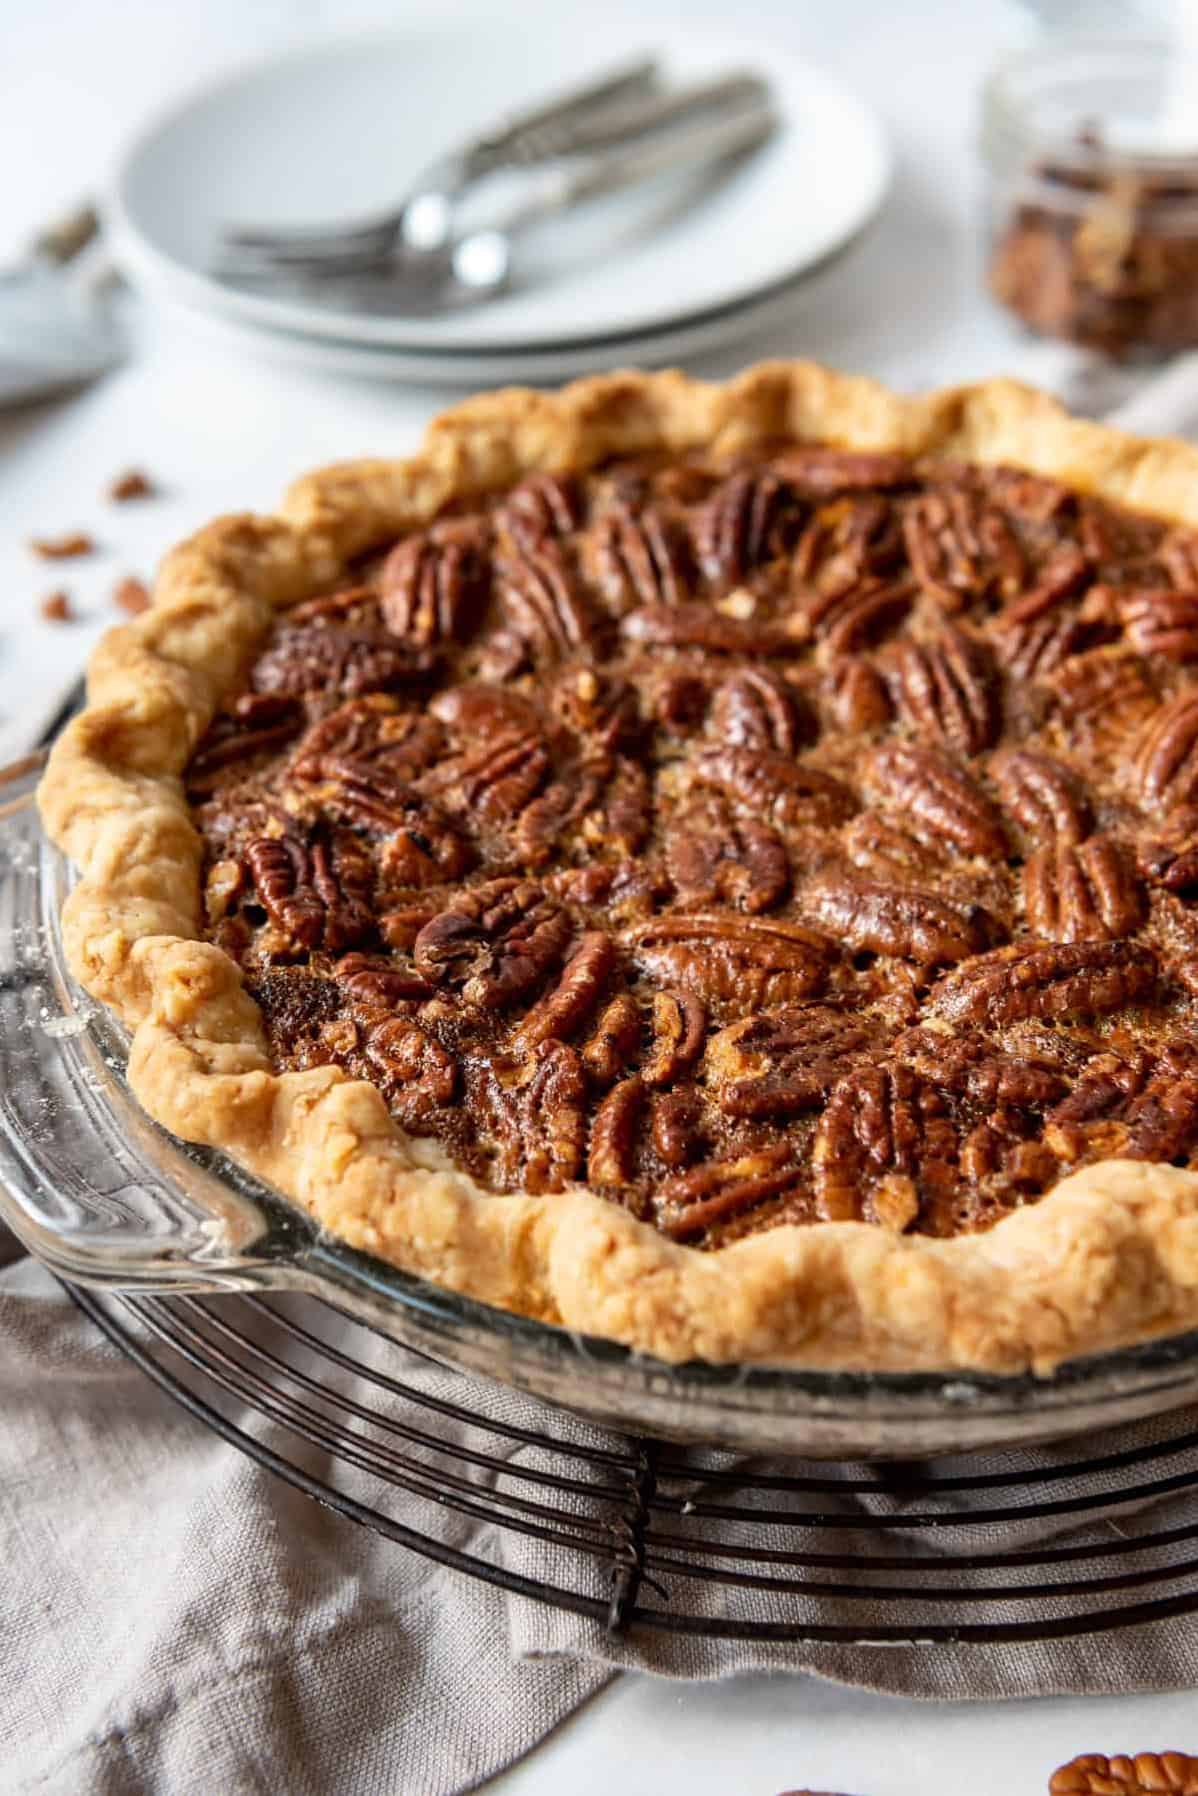  A true Georgian delicacy, this pecan pie recipe will have you coming back for seconds and even thirds!